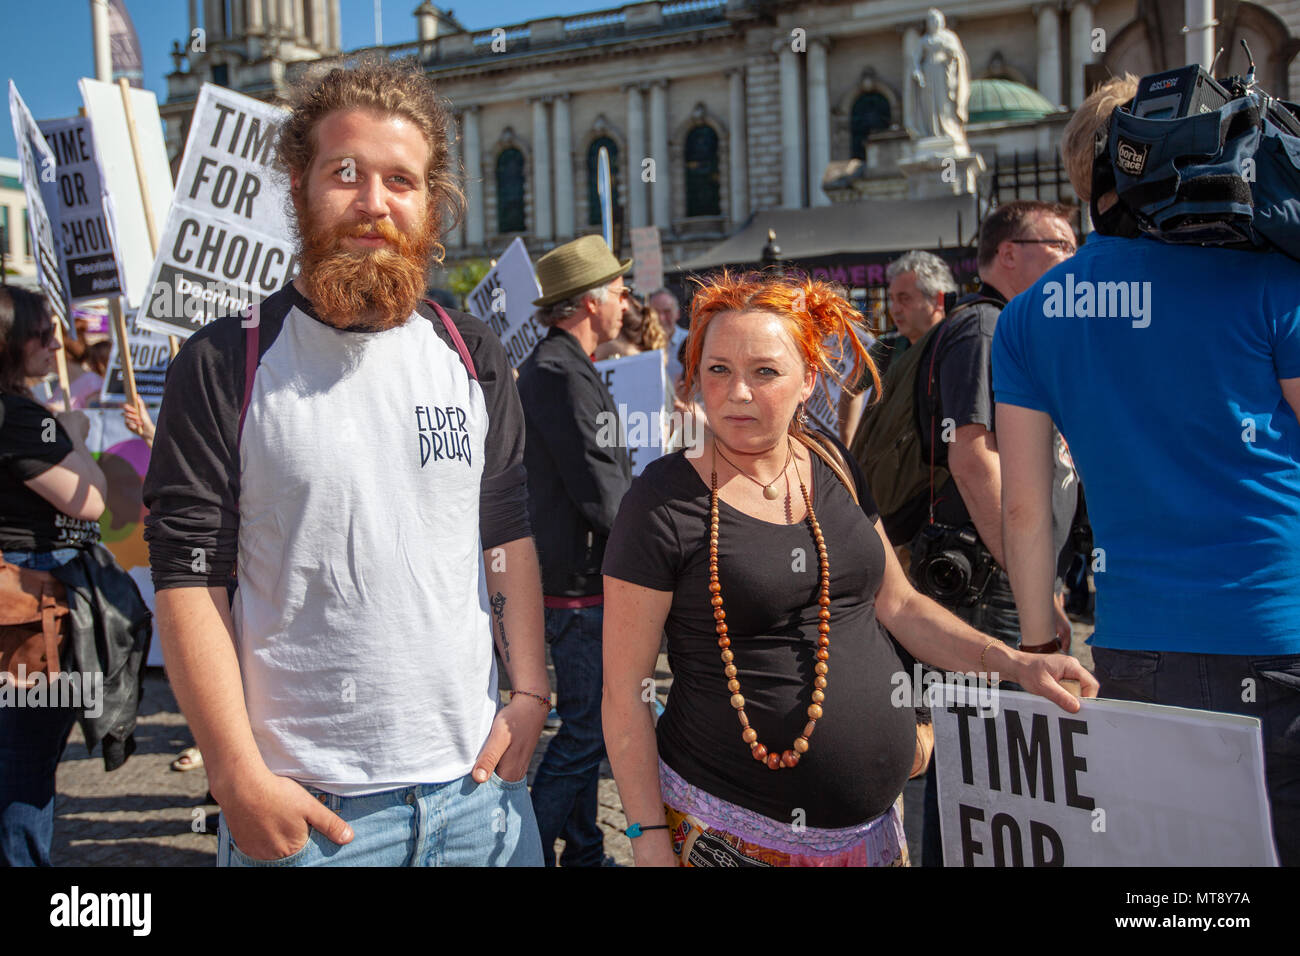 Belfast City hall,  Northern Ireland.28th May 2018. Lucile Vanlerberghe (31) From France who ios due to give Birth in June at the #TimeForChoice rally outside Belfast City HallPhoto: Sean Harkin/Alamy Live News  Stock Photo